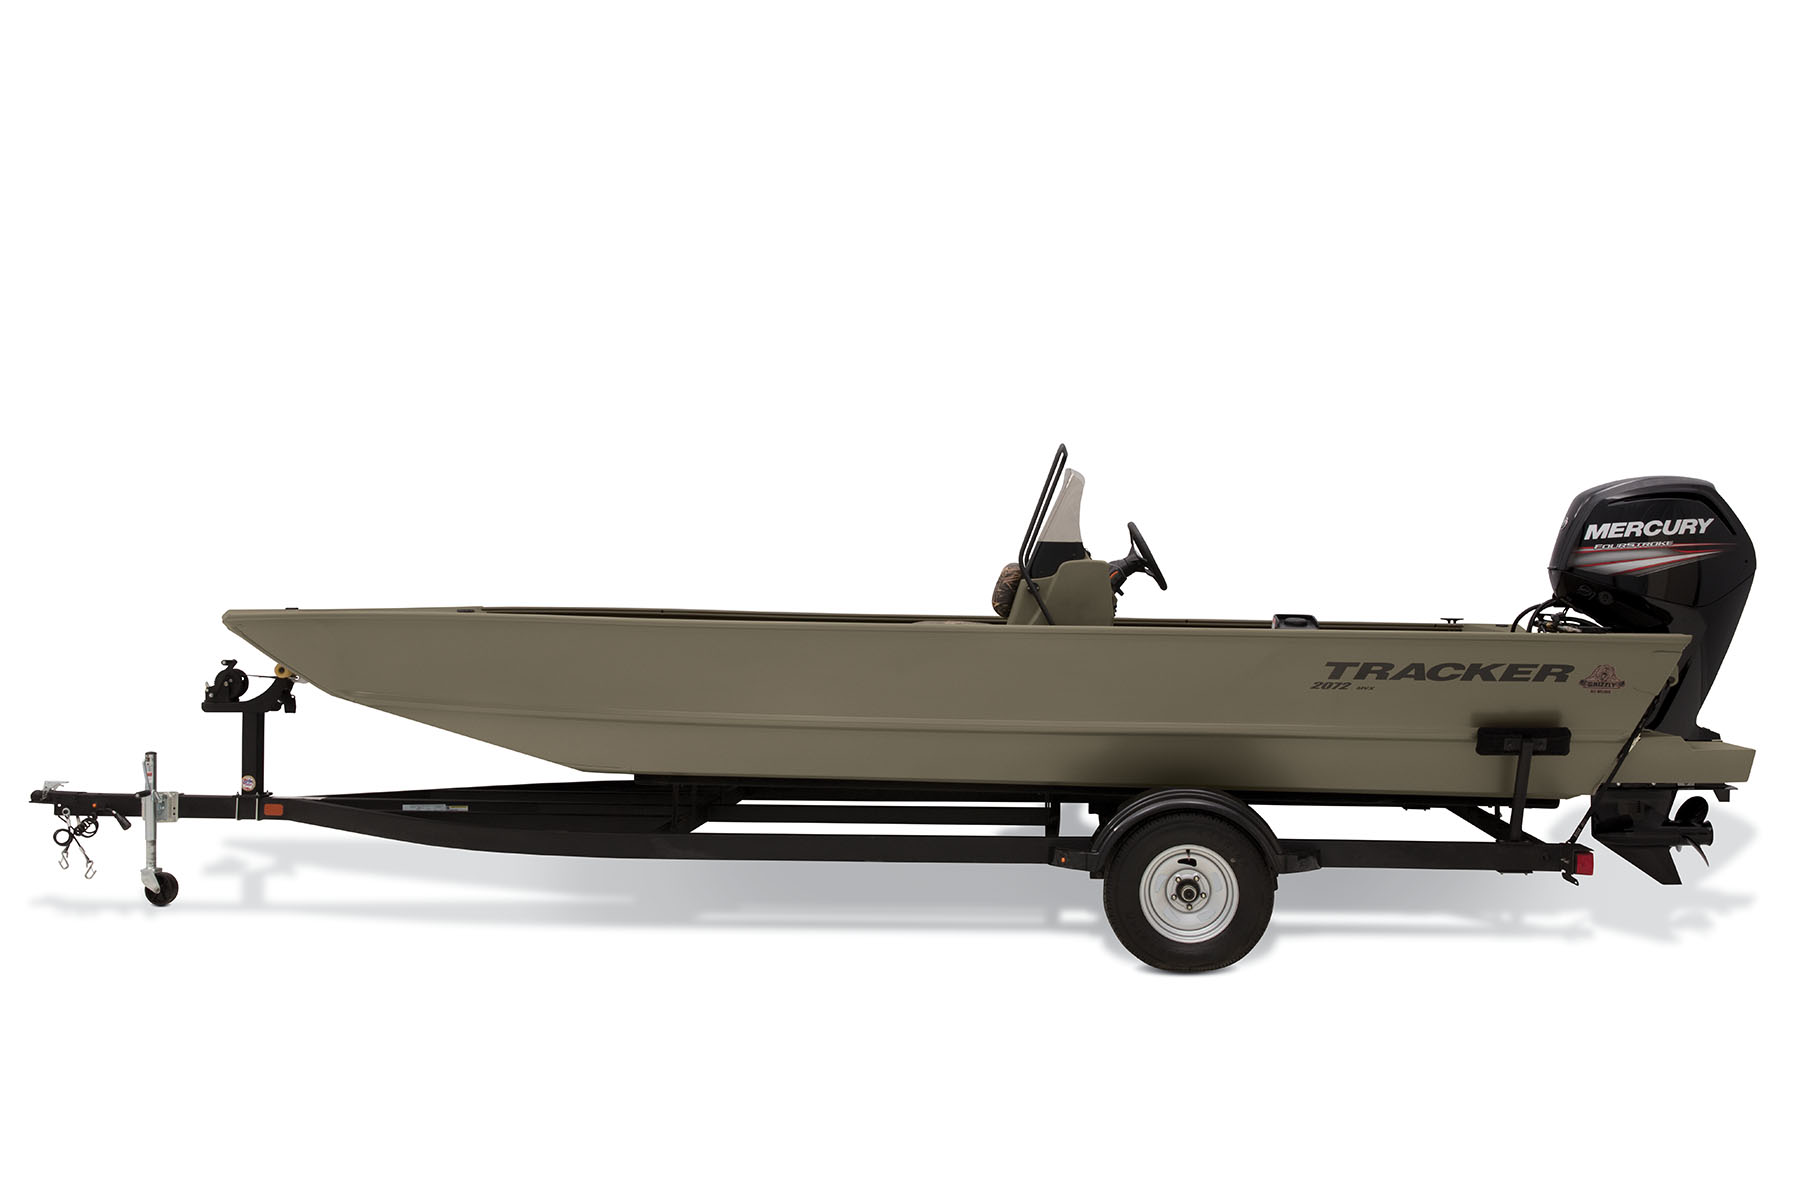 12' Jon Boat mods and weight limit questions - Bass Boats, Canoes